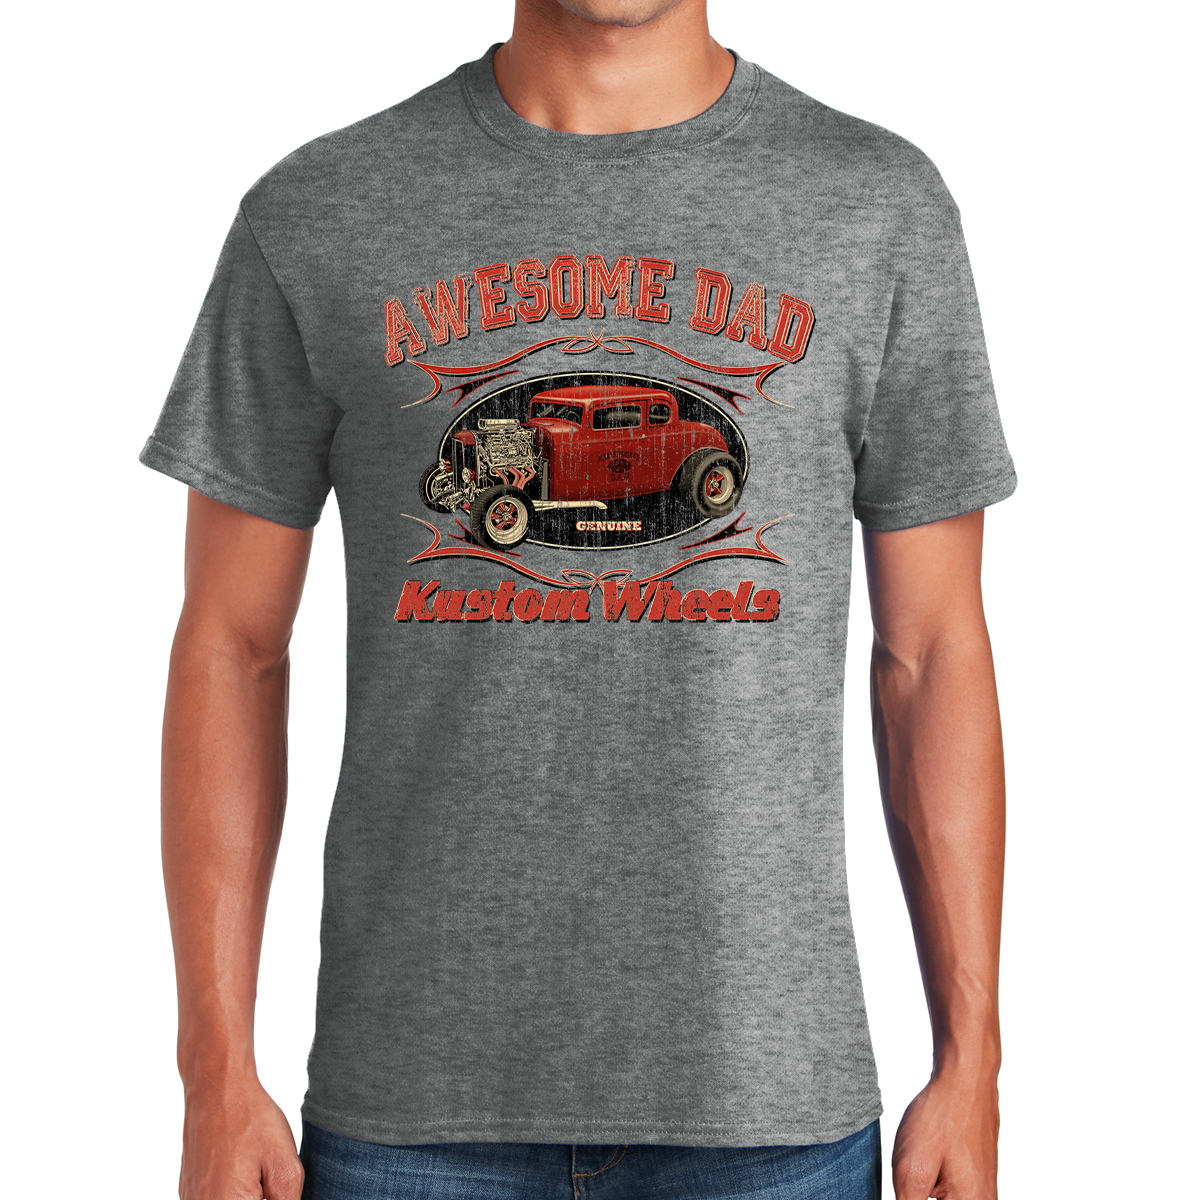 Awesome Dad Hot Rod Kustom Wheels Revving Up Fatherhood Gift For Dads T-shirt